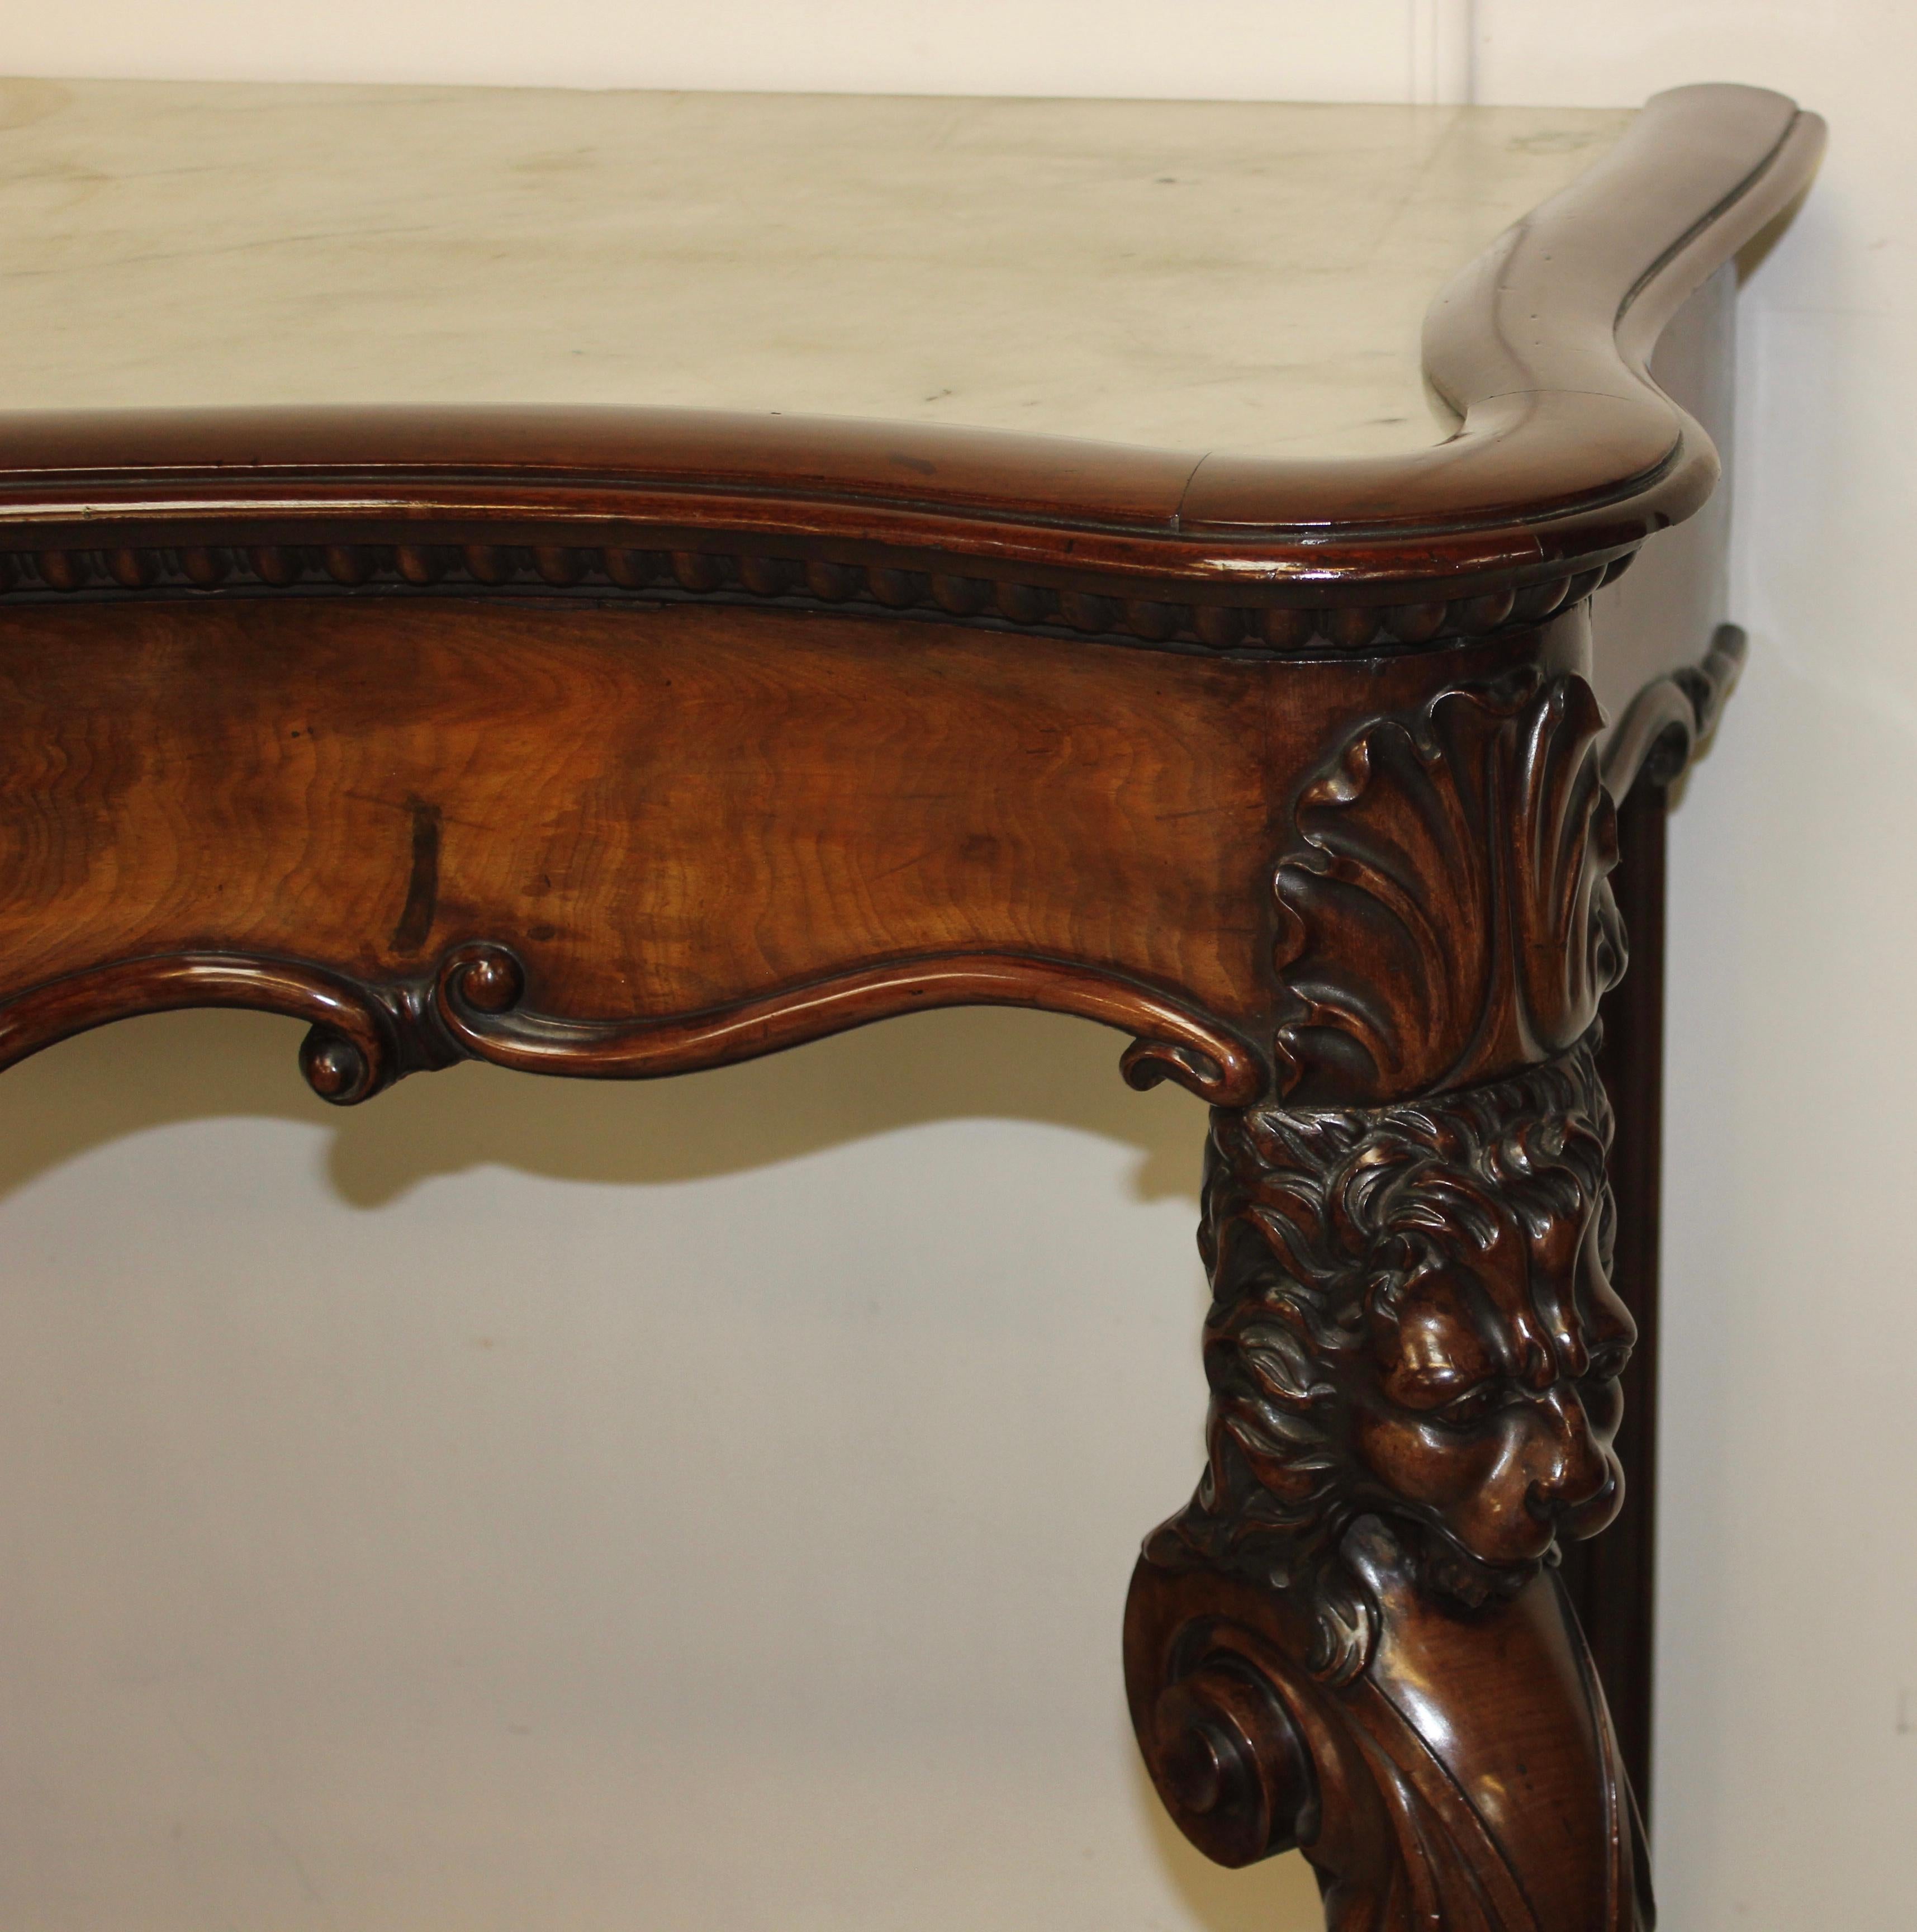 Fine Quality Mahogany Console Table In Good Condition For Sale In Chulmleigh, Devon